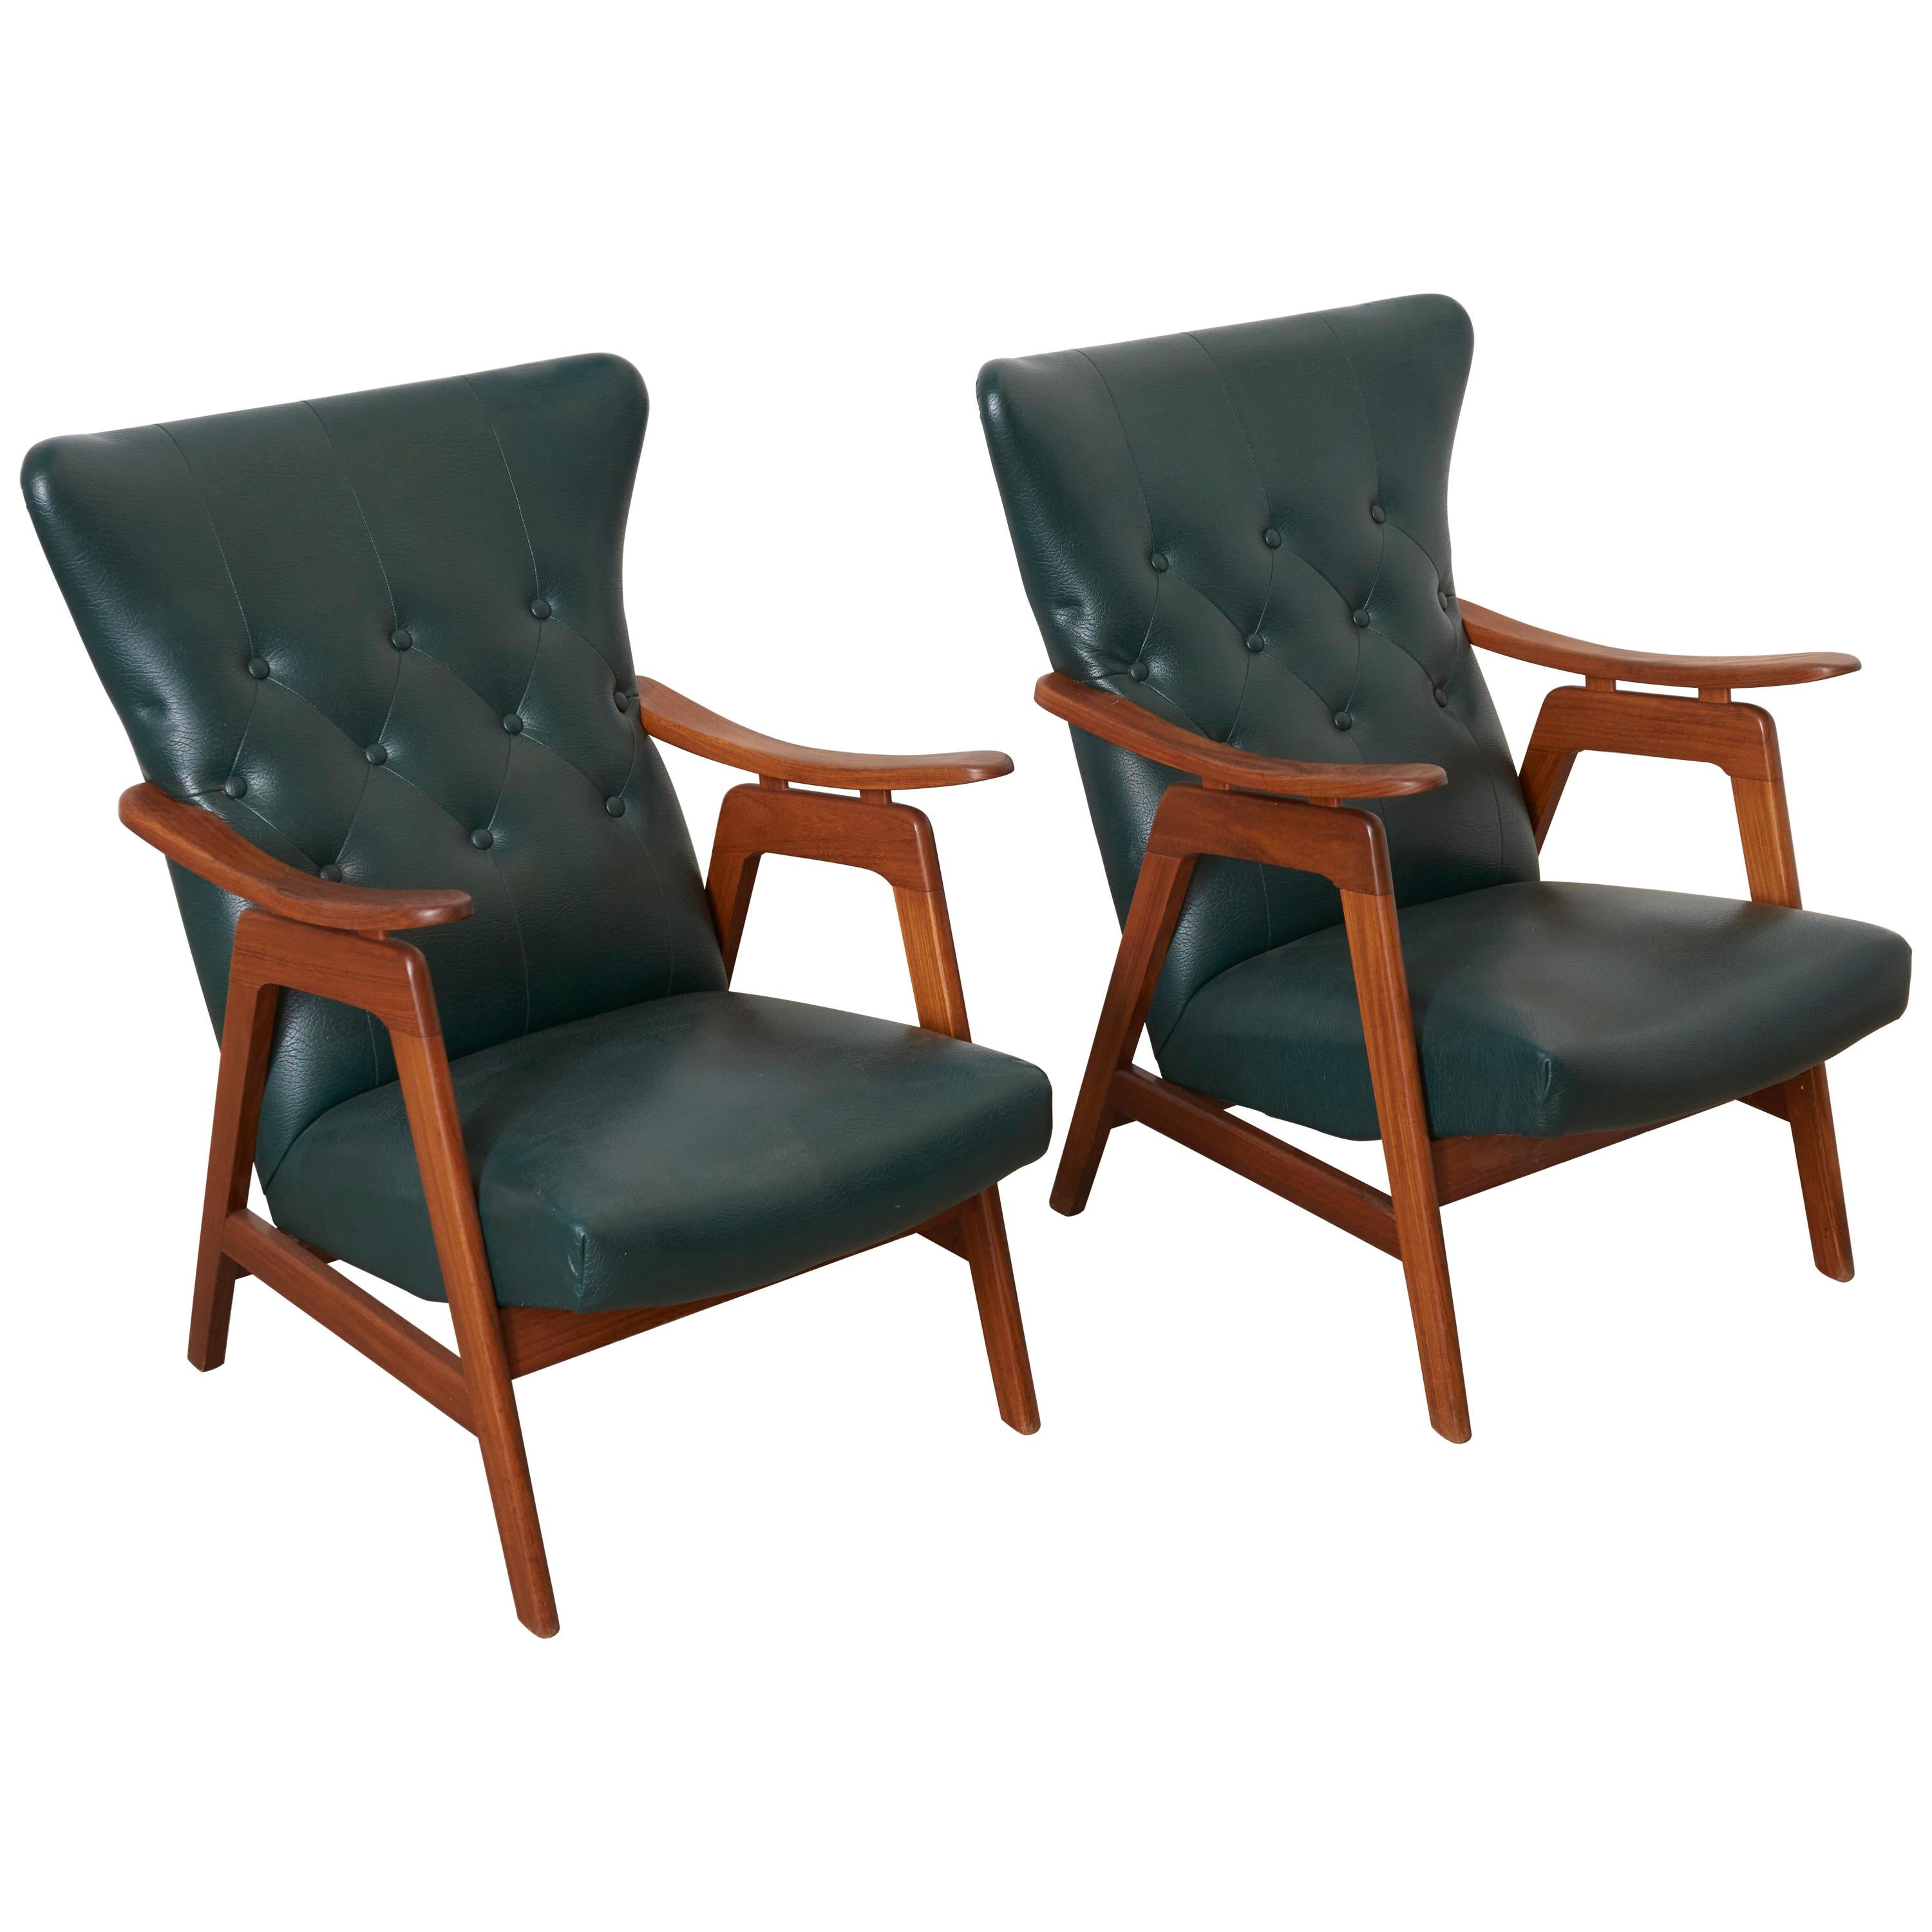 Set of Two Dutch Design Wing Back Chairs by Louis Van Teeffelen for Webe, 1960s